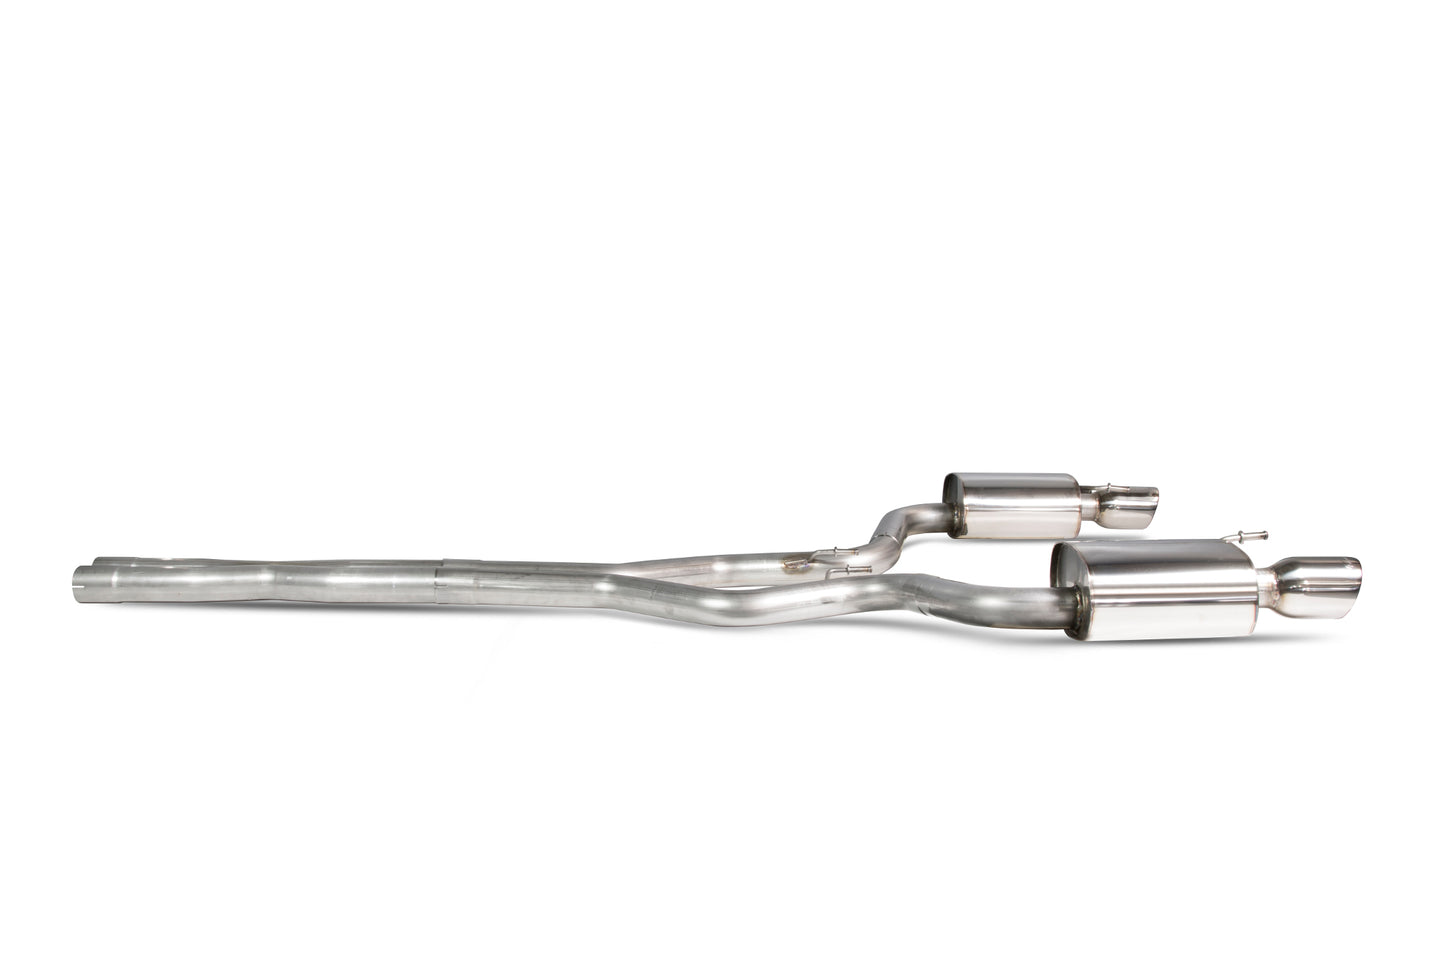 Scorpion Non-Res Cat Back Exhaust - Ford Mustang 5.0 V8 GT (15-18)